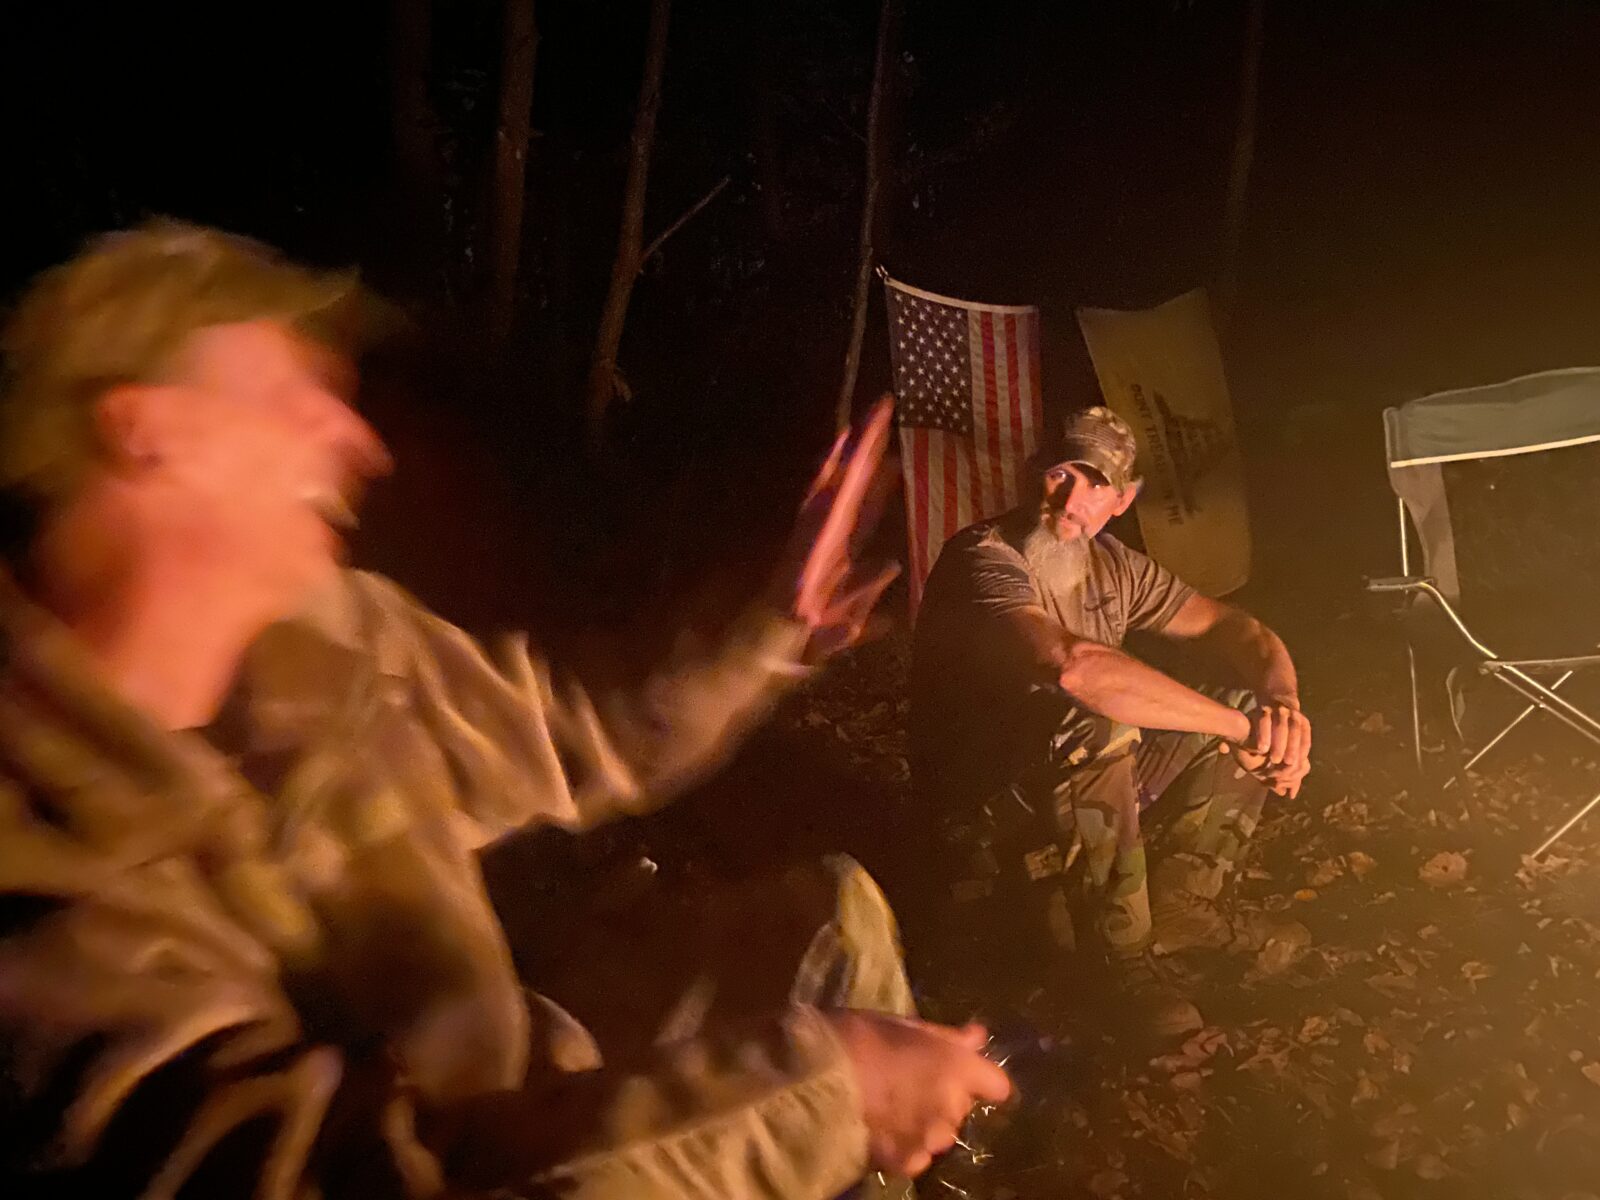 Members of the Pennsylvania Volunteer Militia tell stories around the campfire during their monthly training weekend in October. The militia’s leader says the group’s goal is to protect the Constitution and free speech.